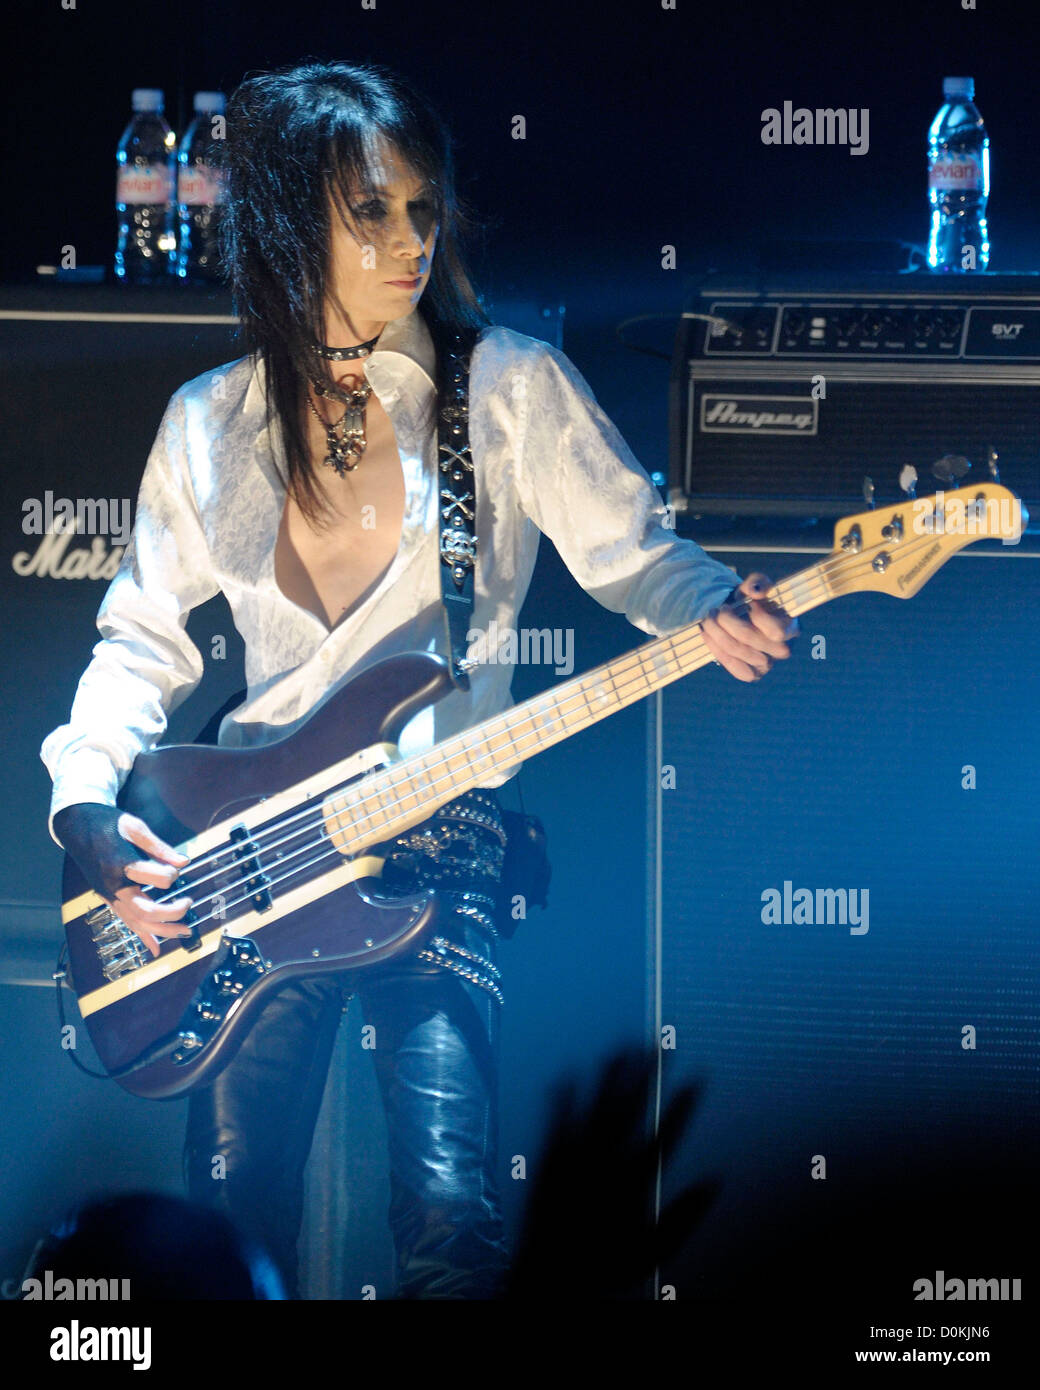 Hiroshi Heath Morie Of X Japan Performing On Stage At Massey Hall Toronto Canadadominic Stock Photo Alamy